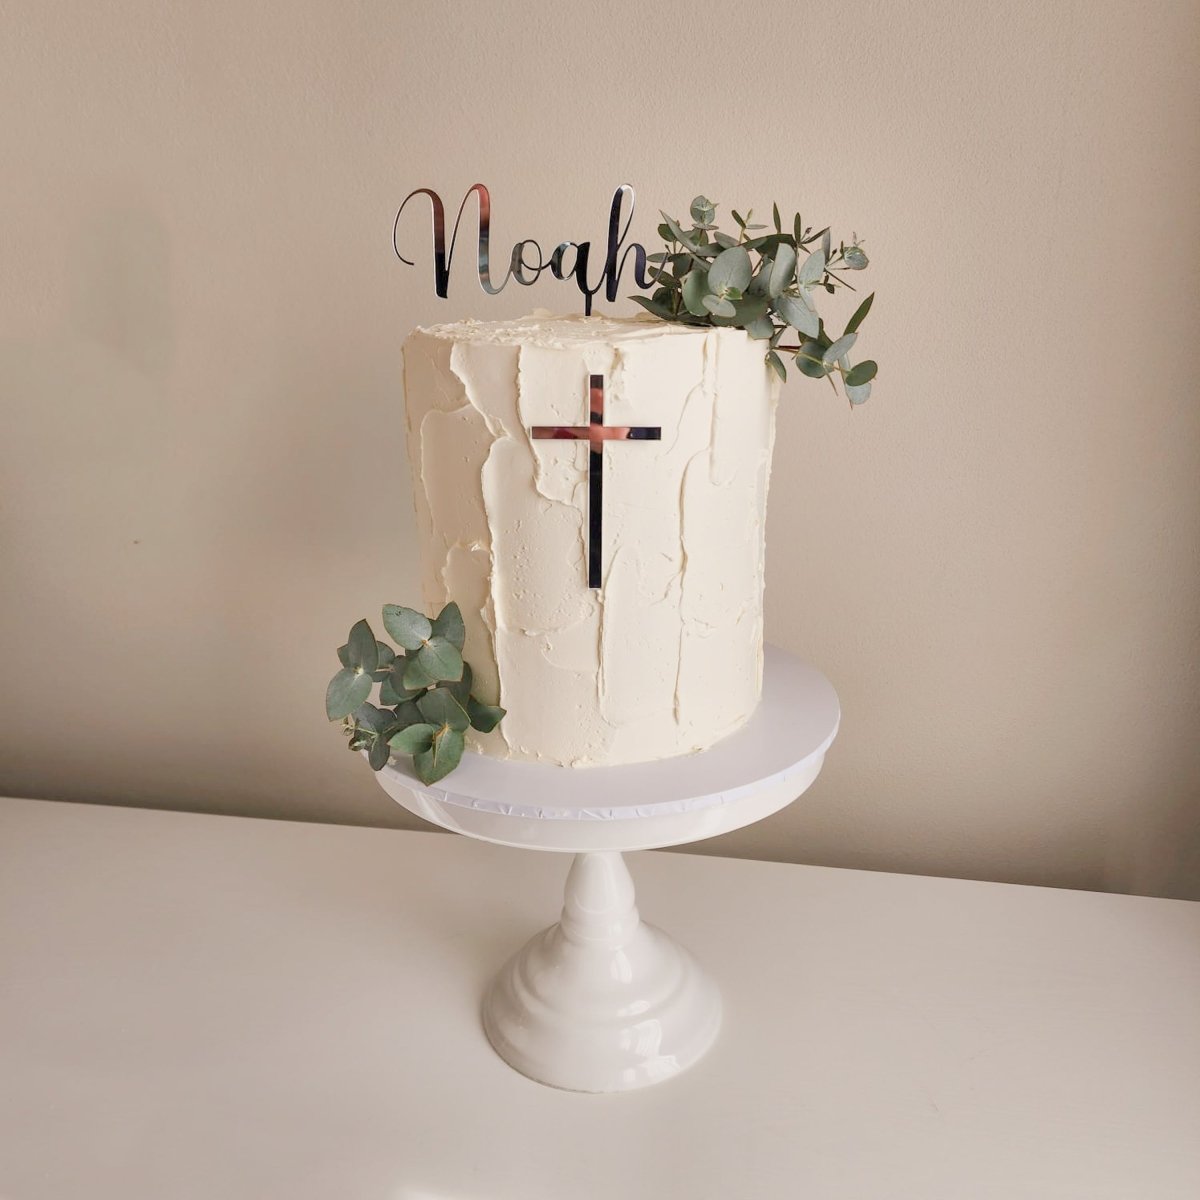 The Southern Wedding Tradition of Cake Pulls | LoveToKnow